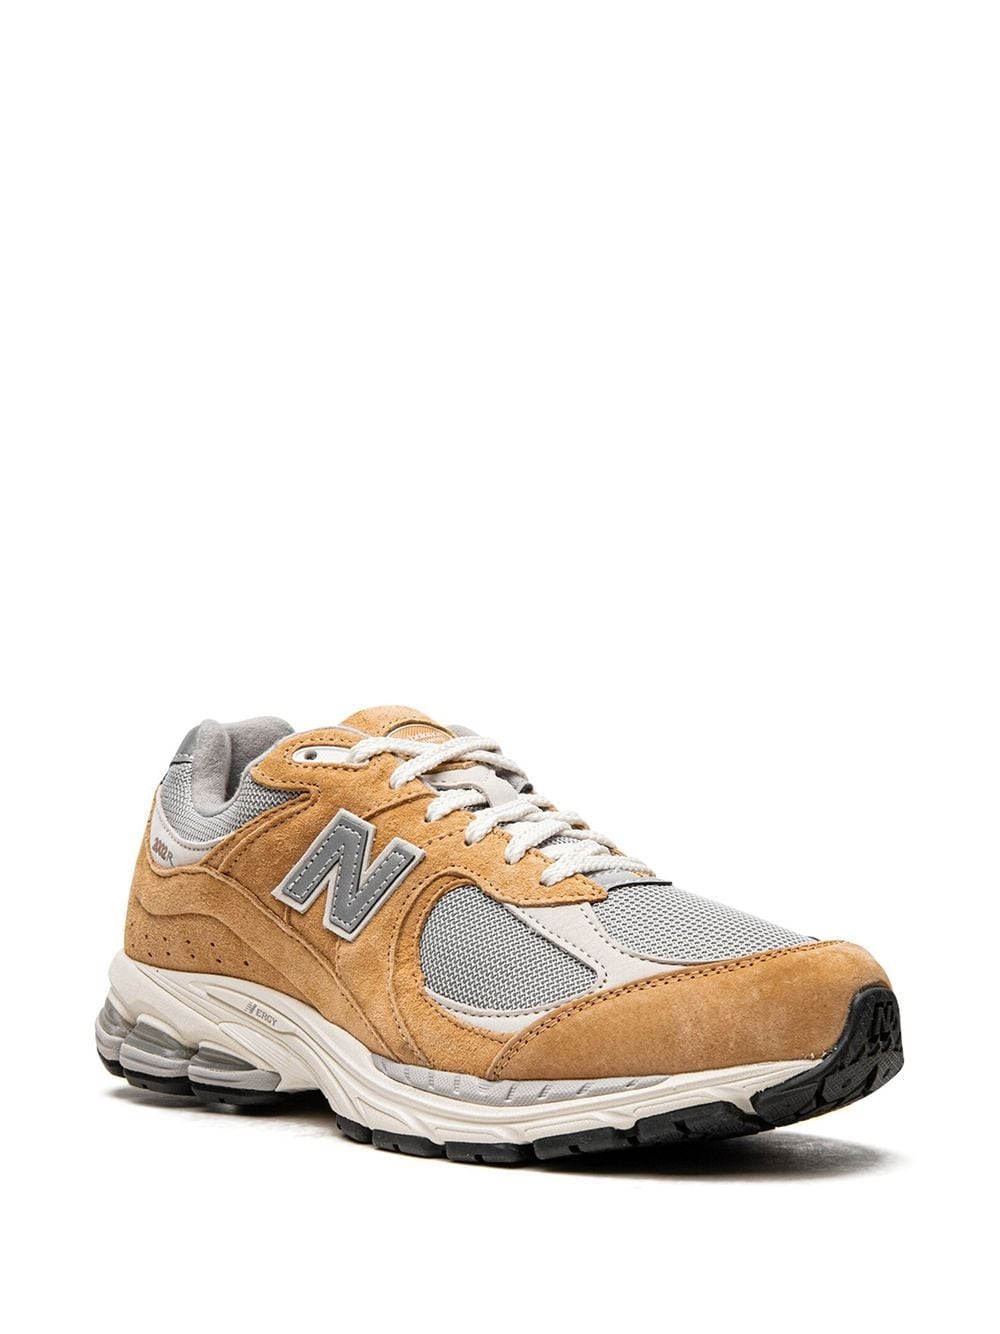 Image 2 of New Balance 2002R "Sweet Caramel" sneakers